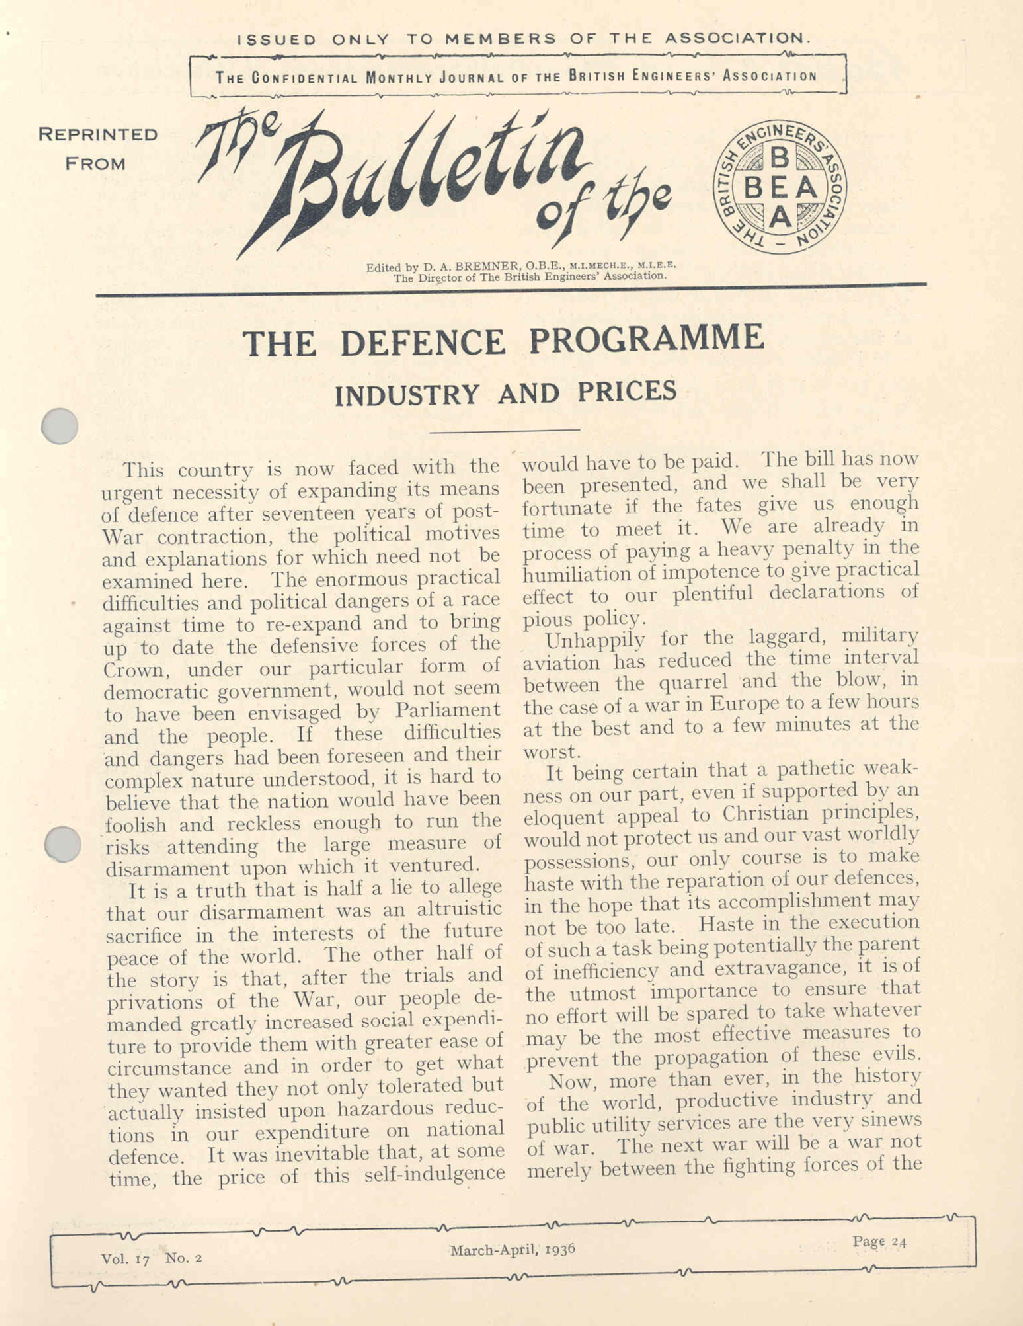 'The Defence Programme: Industry and prices', 1936